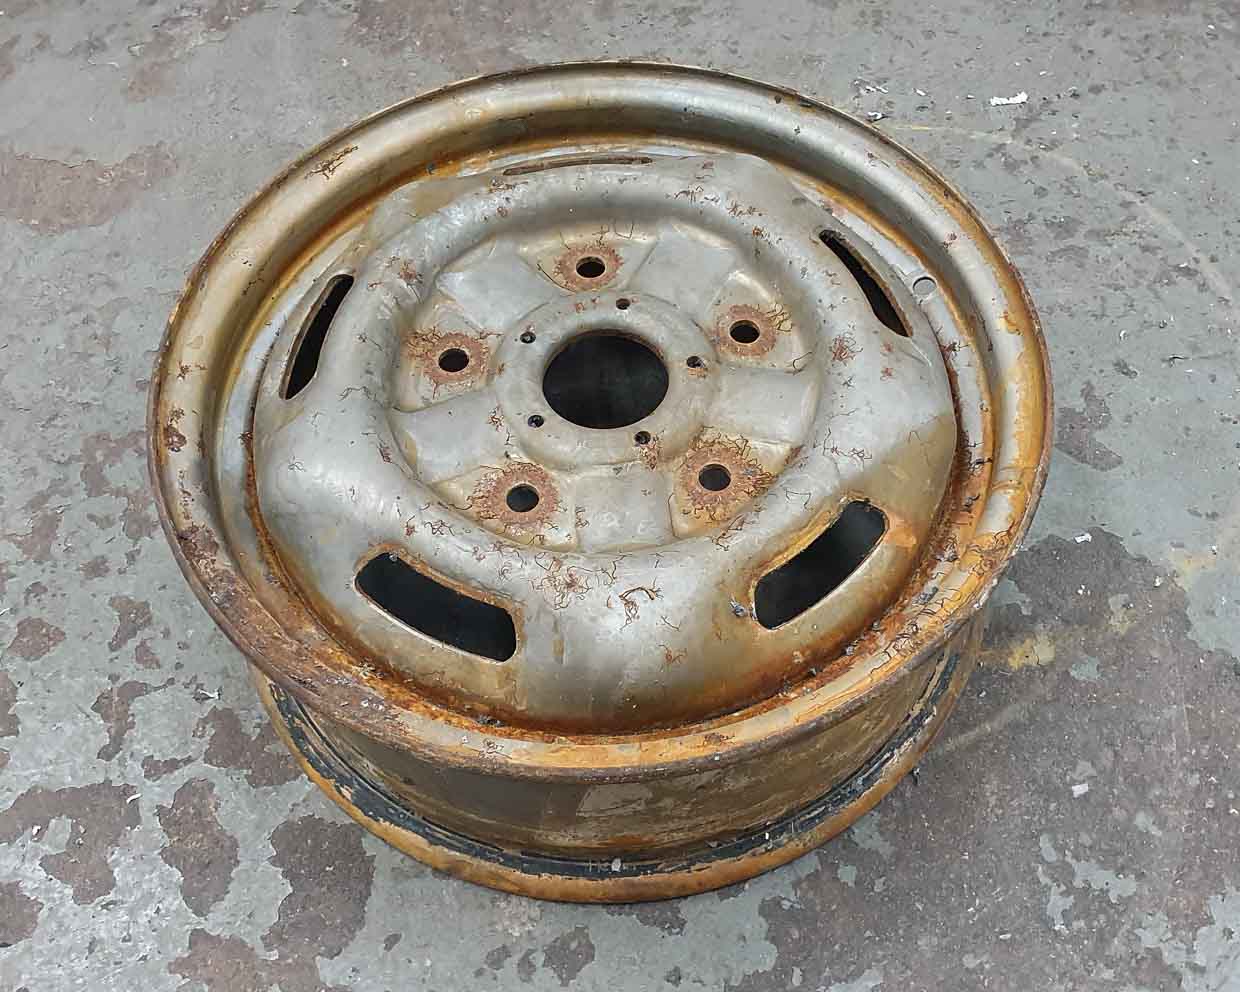 Steel wheel covered in rust awaiting to be refurbished and powder coated